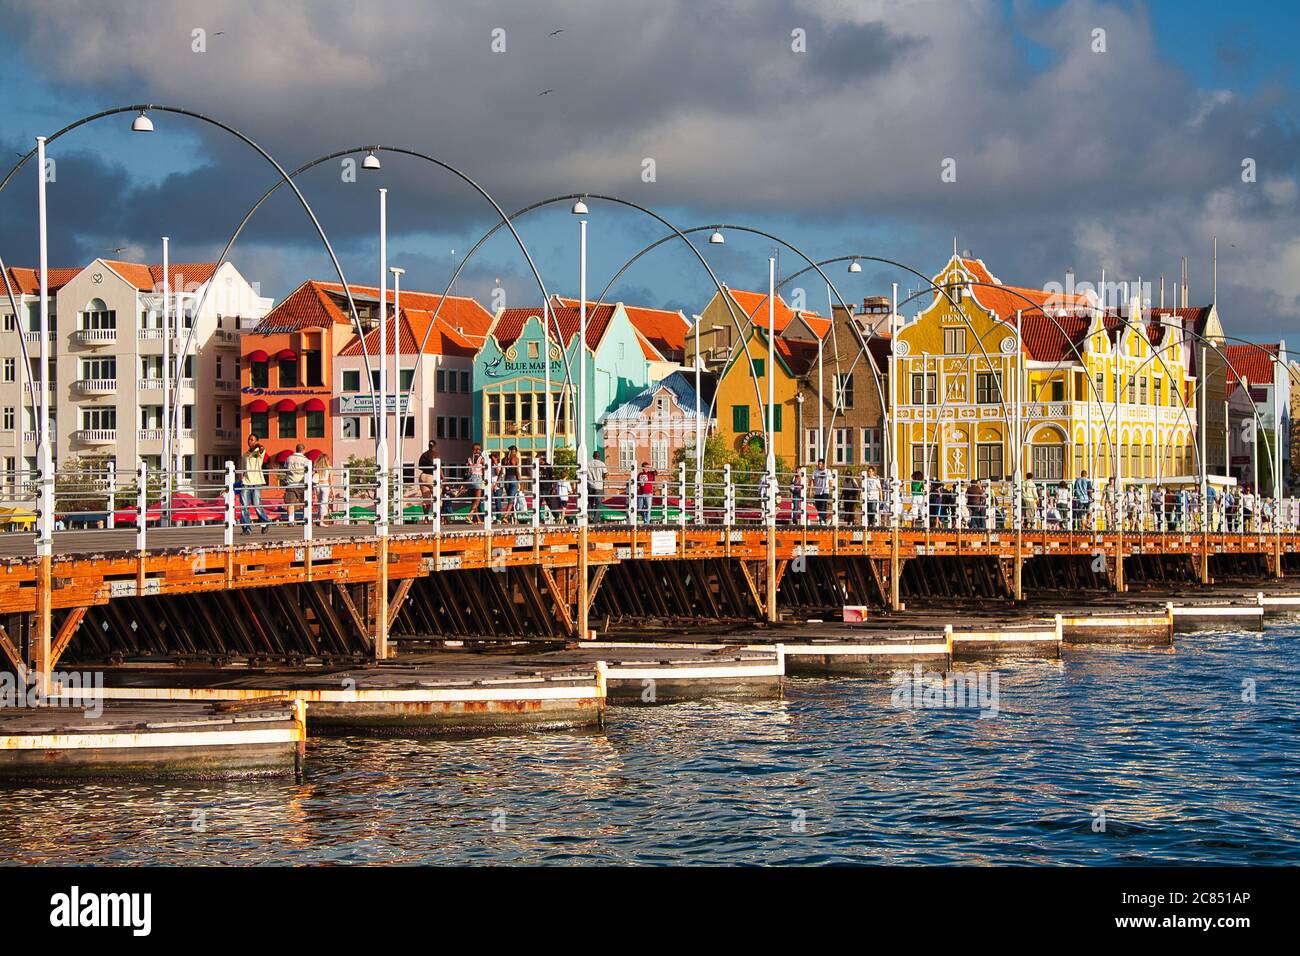 People walking over Queen Emma Bridge with typical Dutch style buildings in the background, Willemstat, Curacao, The Caribbean, West Indies Stock Photo